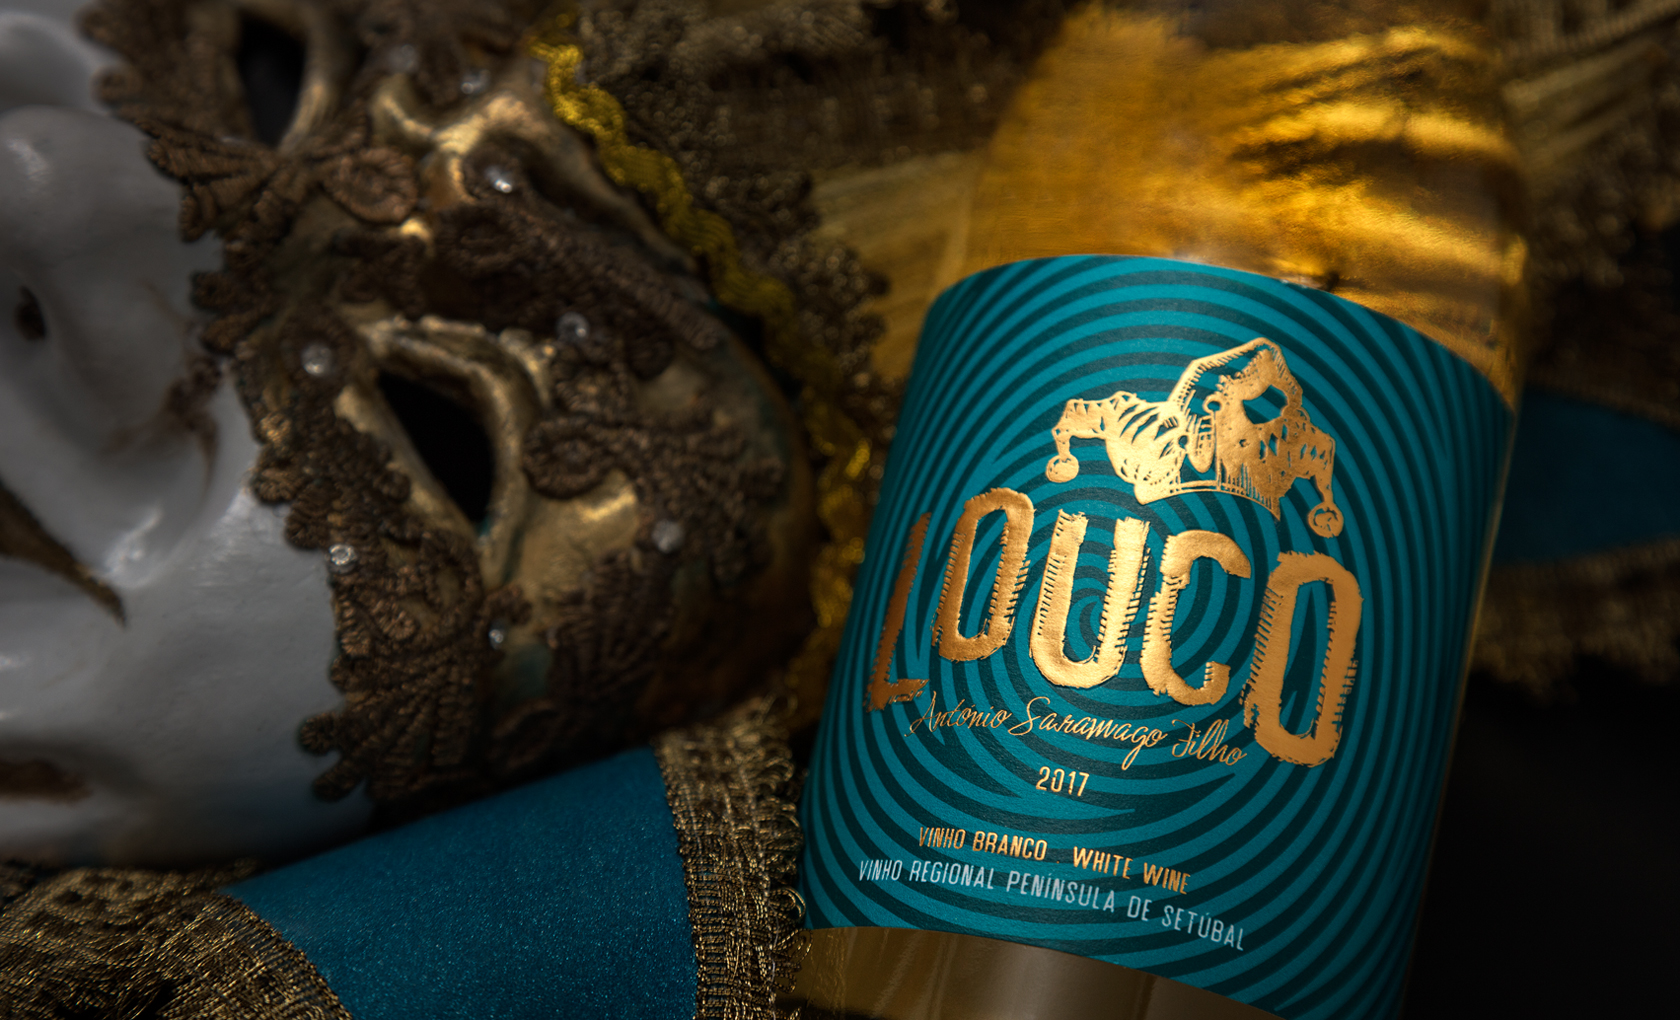 MUSE Design Winners - “Louco” - A crazy design for a wine that breaks patterns